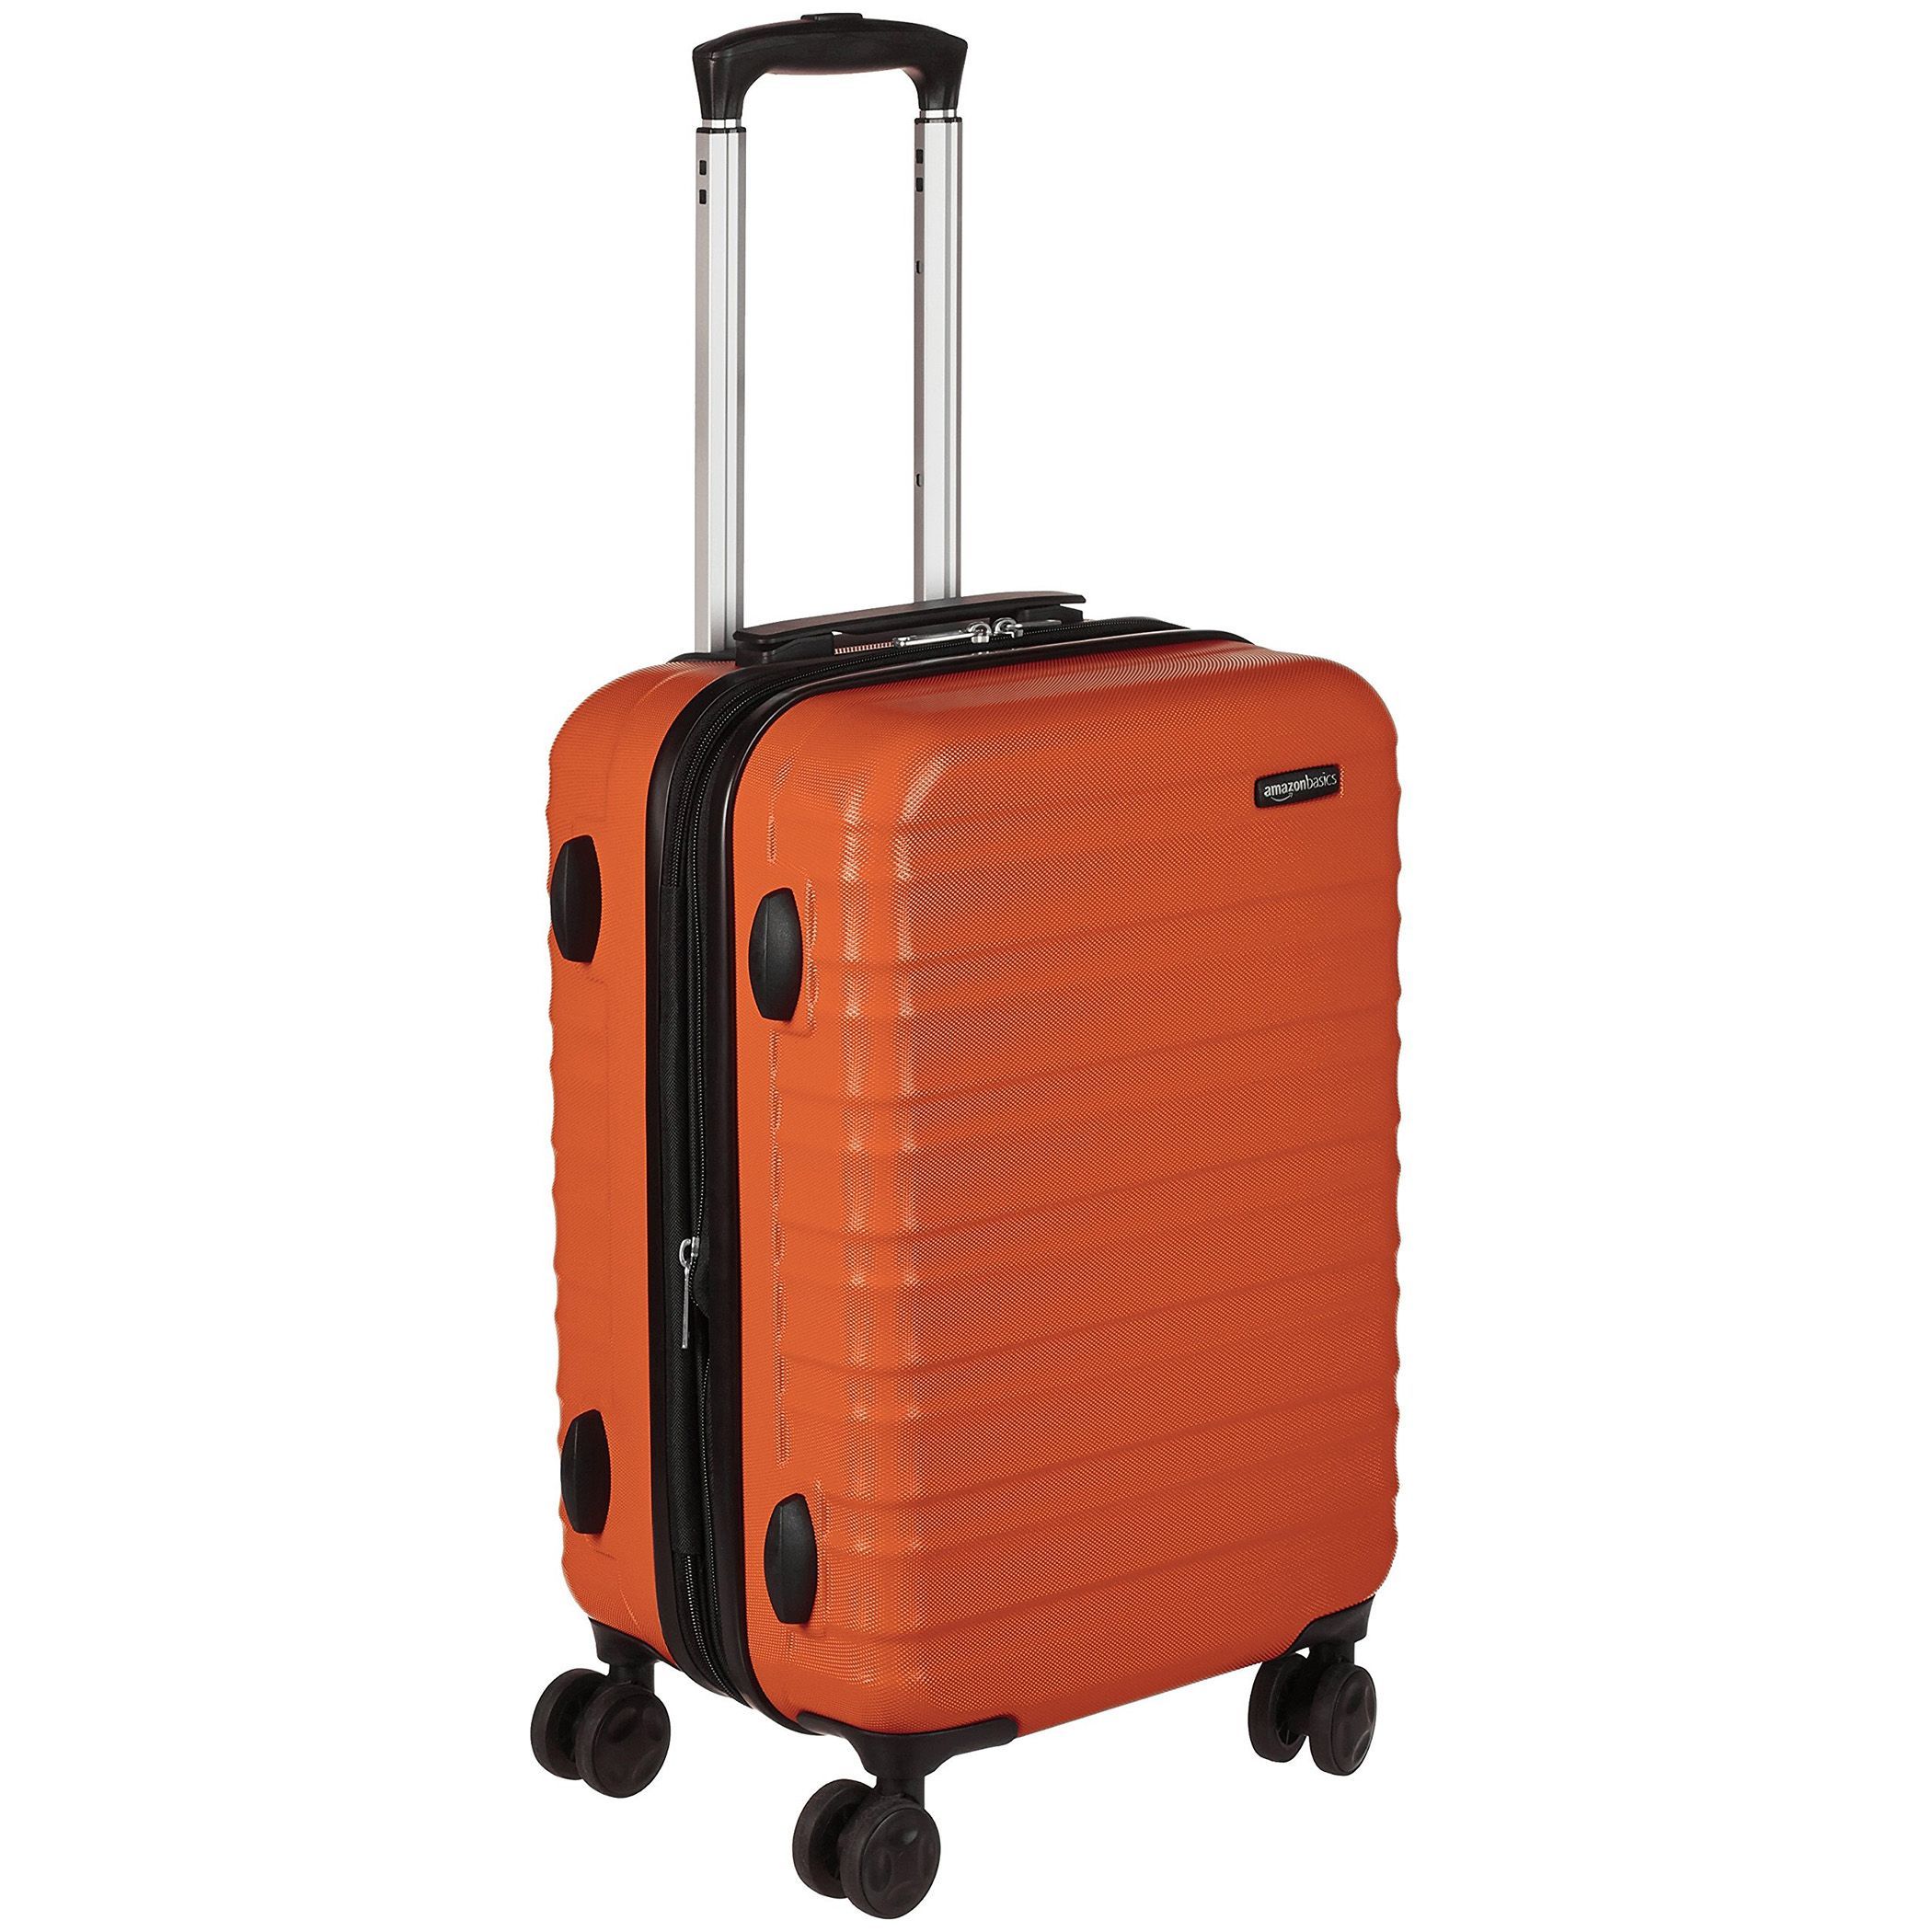 <p><strong>$89.99</strong></p><p>Don't scoff—<em>Good Housekeeping</em> put a ton of luggage through its renowned testing lab wringer and found that <a href="https://www.amazon.com/stores/AmazonBasics/AmazonBasics/page/947C6949-CF8E-4BD3-914A-B411DD3E4433?tag=syndication-20&ascsubtag=%5Bartid%7C10064.g.44130437%5Bsrc%7Cmsn-us">Amazon Basics</a> luggage is a phenomenal deal for the price. They also noted the wide variety of luggage available, from backpacks and duffels to soft-sided spinners. If you're simply looking for (let's just say it) cheap luggage that gets the job done, you could easily spend way more and wind up with far worse.</p><p>GH specifically called out the <strong>Hardside Spinner Carry-On</strong>. Lab testers found it to be "exceptionally easy to pack" and liked its maneuverability and wheel performance. They also liked that it came in a variety of colors and sizes, and was even available in two- and three-packs, although they noted "the ABS material wasn't as scratch-resistant as other models in our tests." </p><a class="body-btn-link" href="https://www.amazon.com/stores/AmazonBasics/AmazonBasics/page/947C6949-CF8E-4BD3-914A-B411DD3E4433?tag=syndication-20&ascsubtag=%5Bartid%7C10064.g.44130437%5Bsrc%7Cmsn-us">shop amazon basics</a>